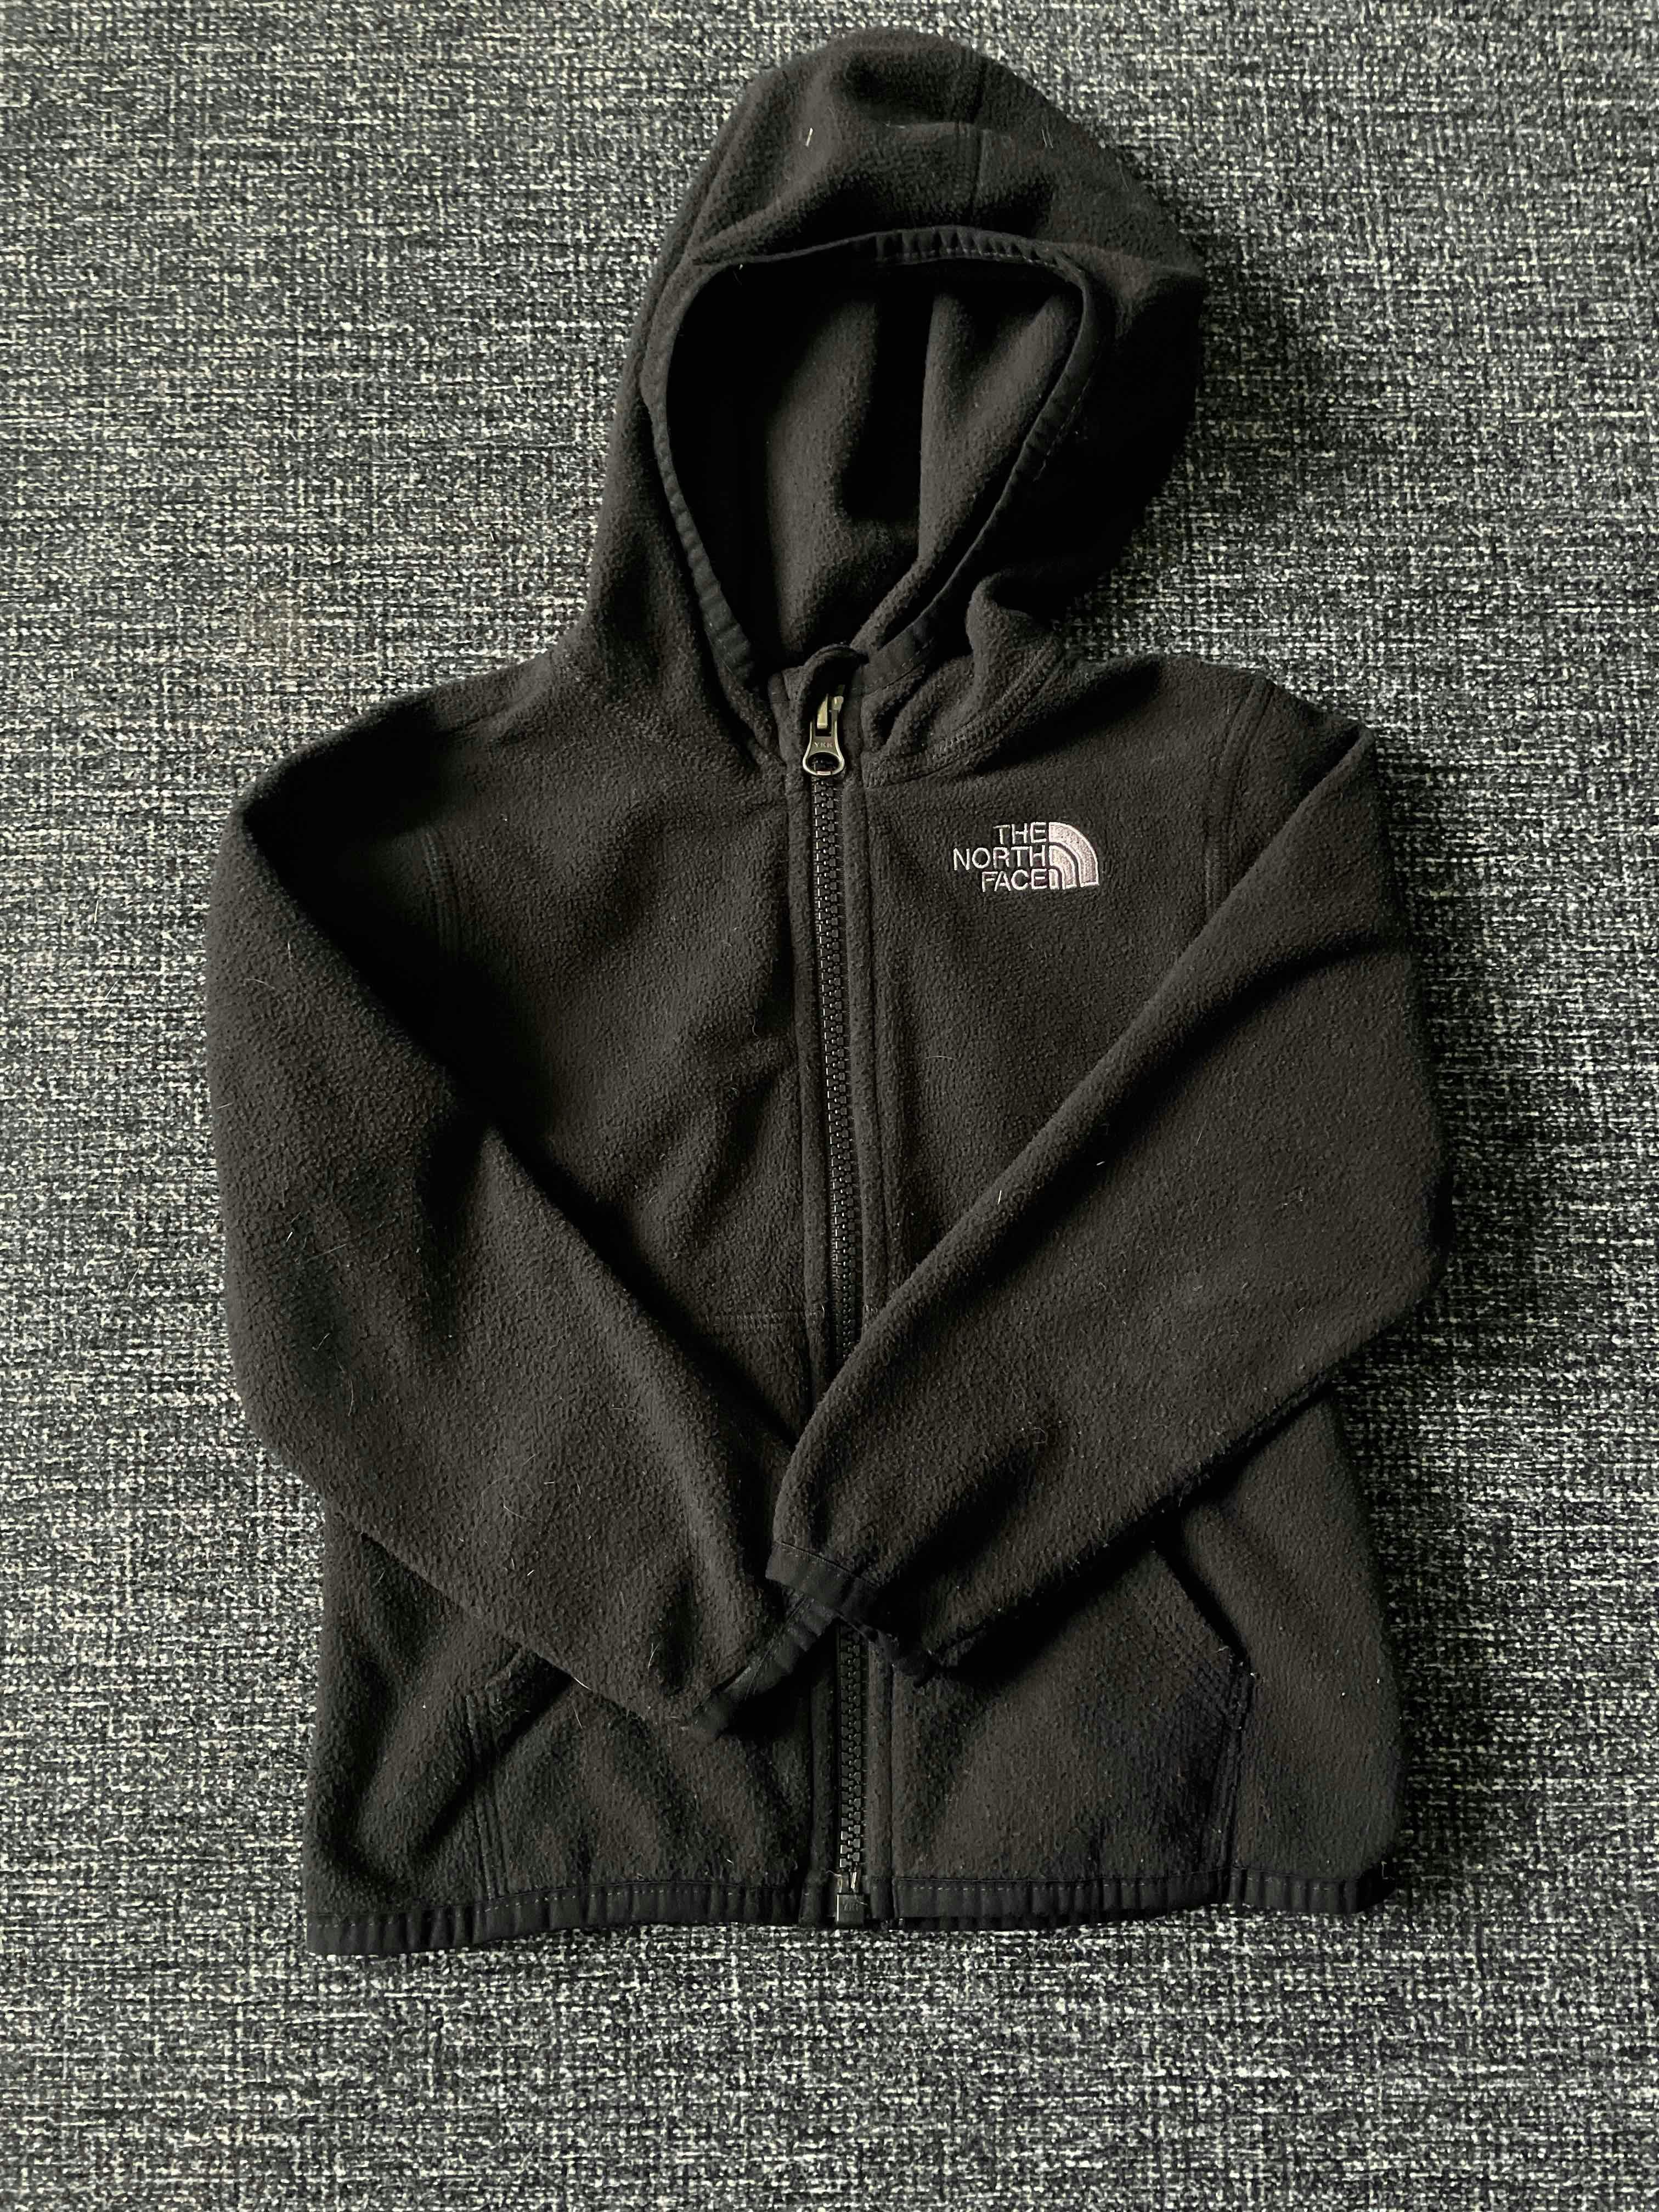  The North Face Glacier Full Zip Hoodie - Infant 18-24 Month